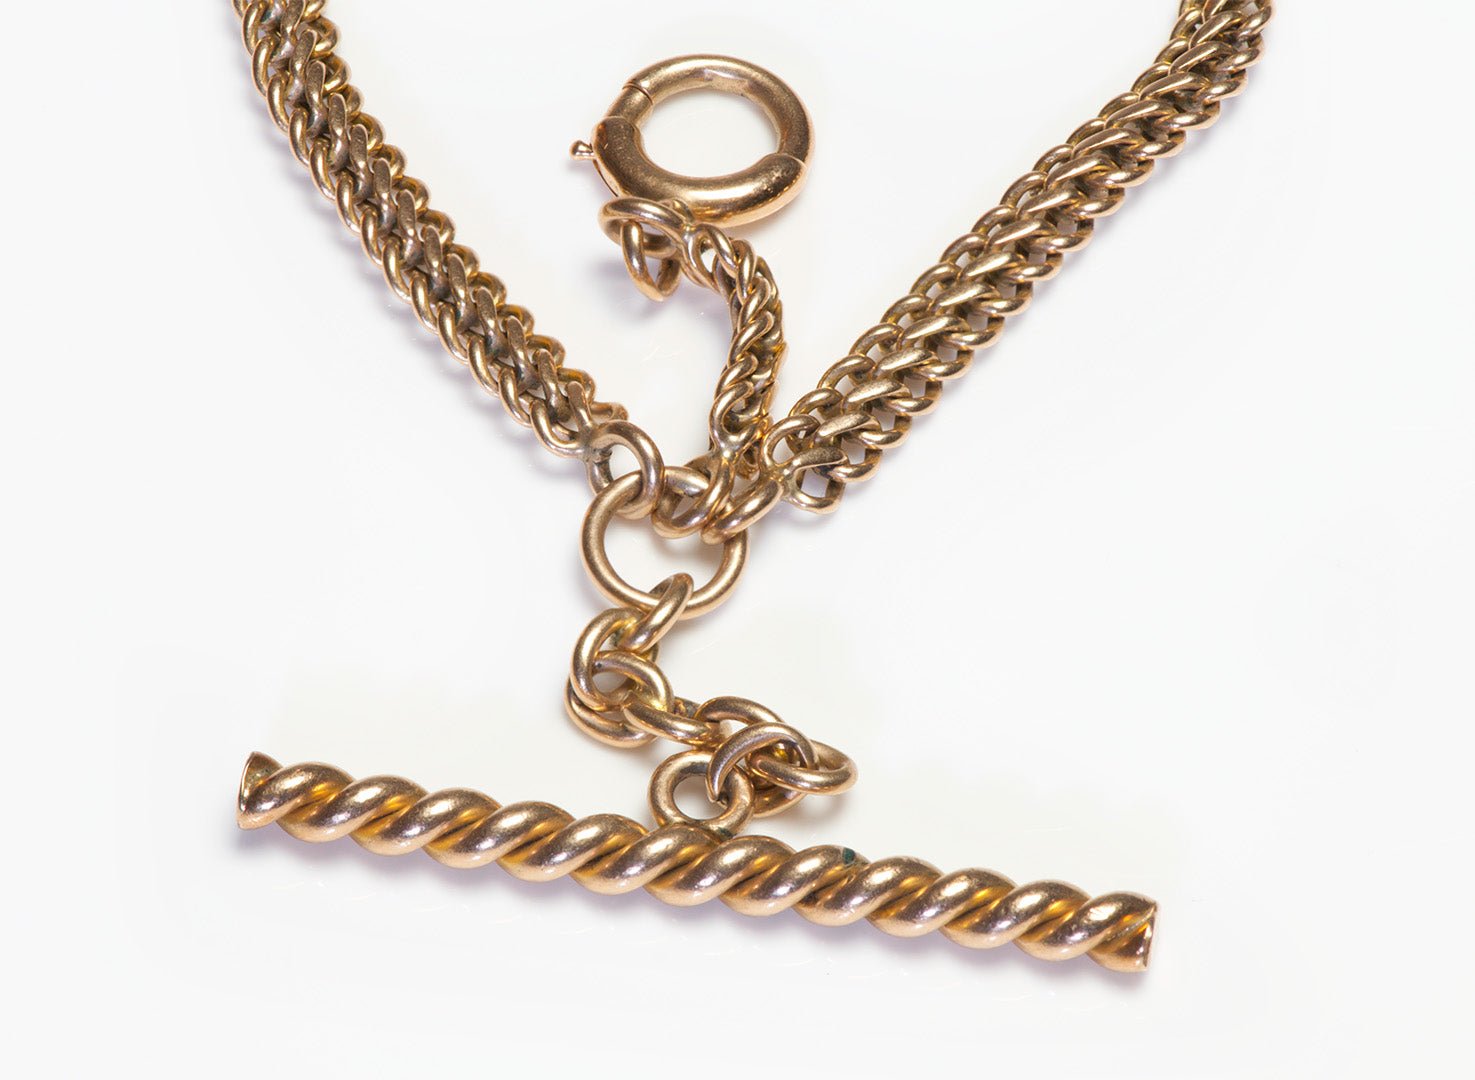 Antique Yellow Gold Watch Fob Chain and Bar - DSF Antique Jewelry